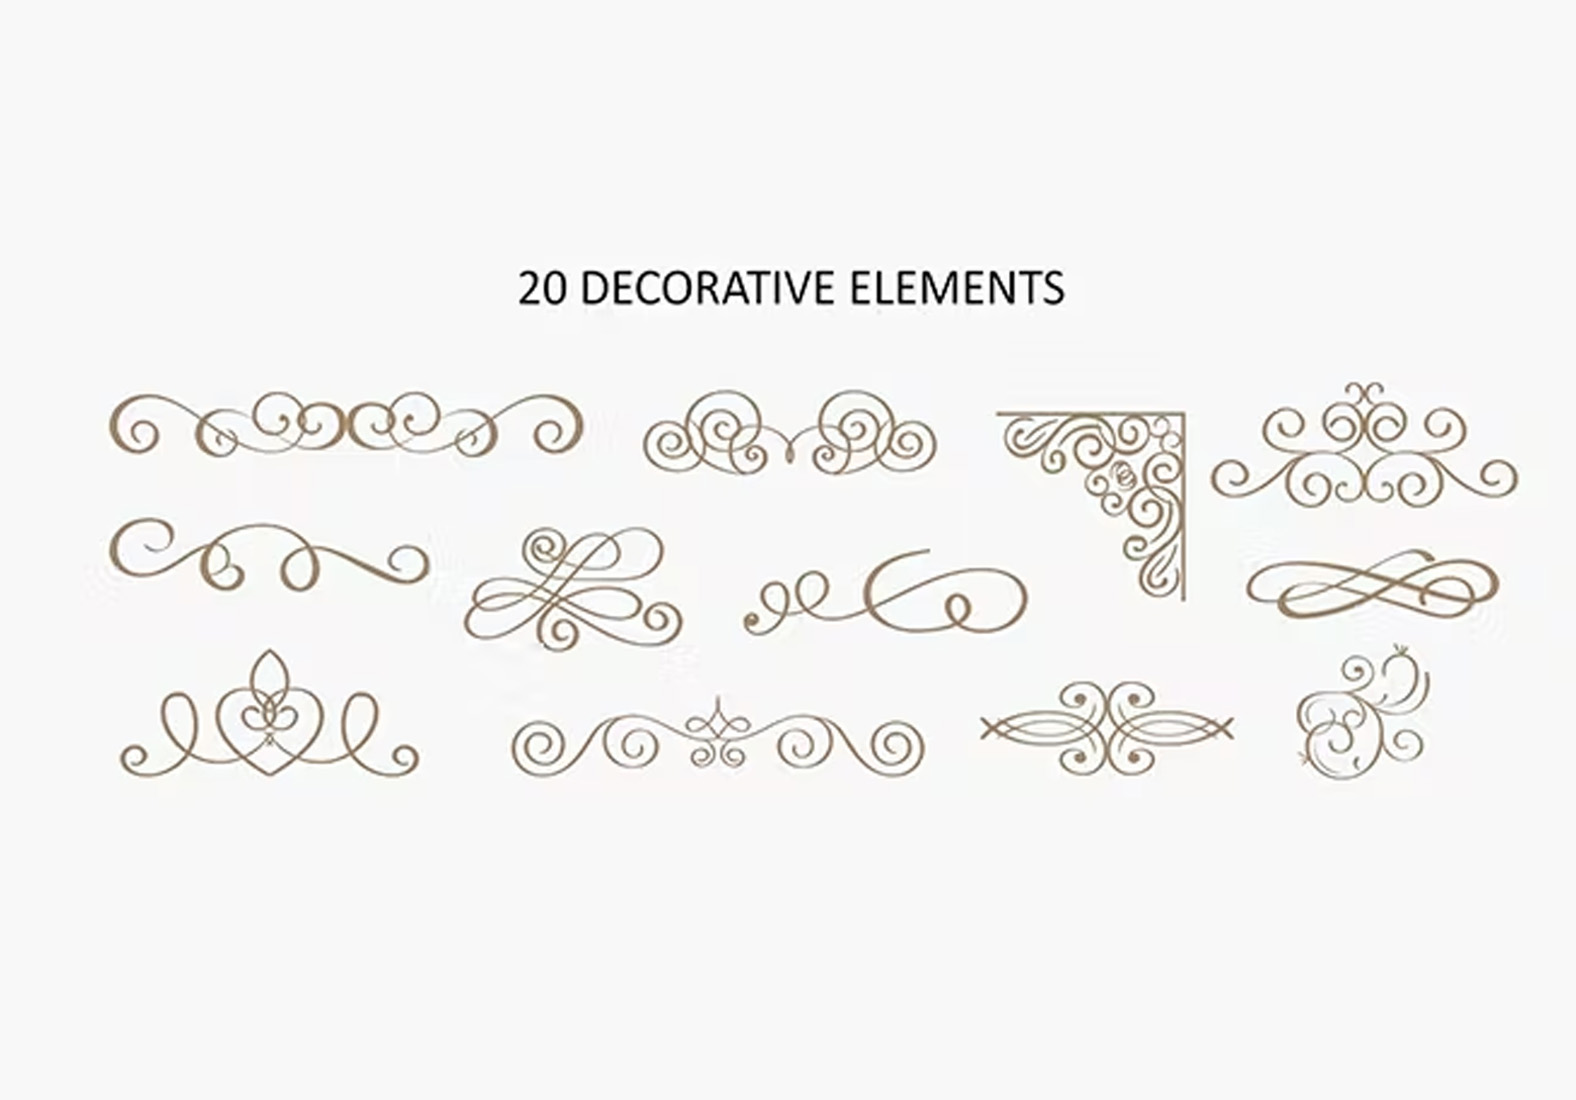 Ornate Elements Branding and Logos Bundle preview image.